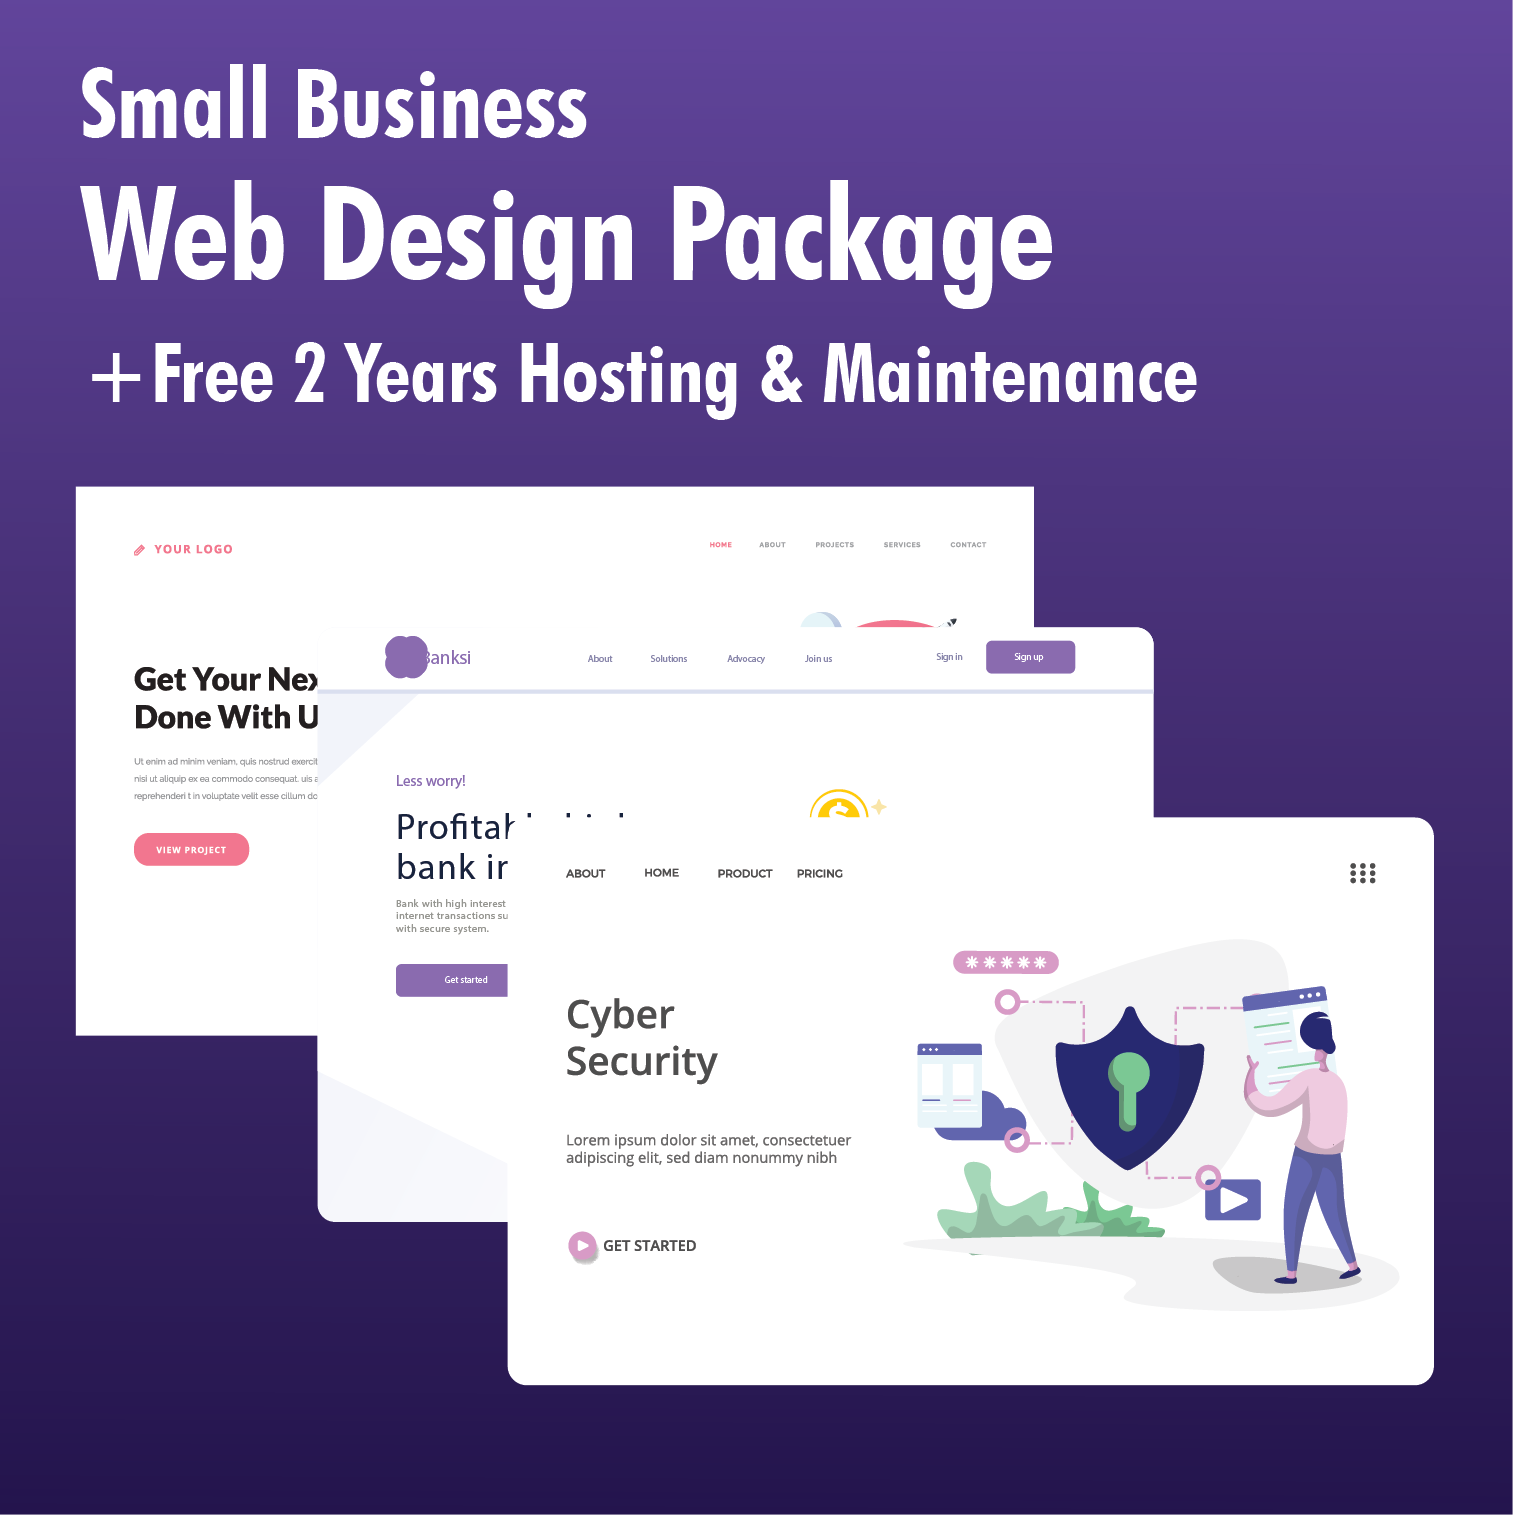 Don't miss out on this incredible web design offer! Sign Up Today And Save $800 Instantly!